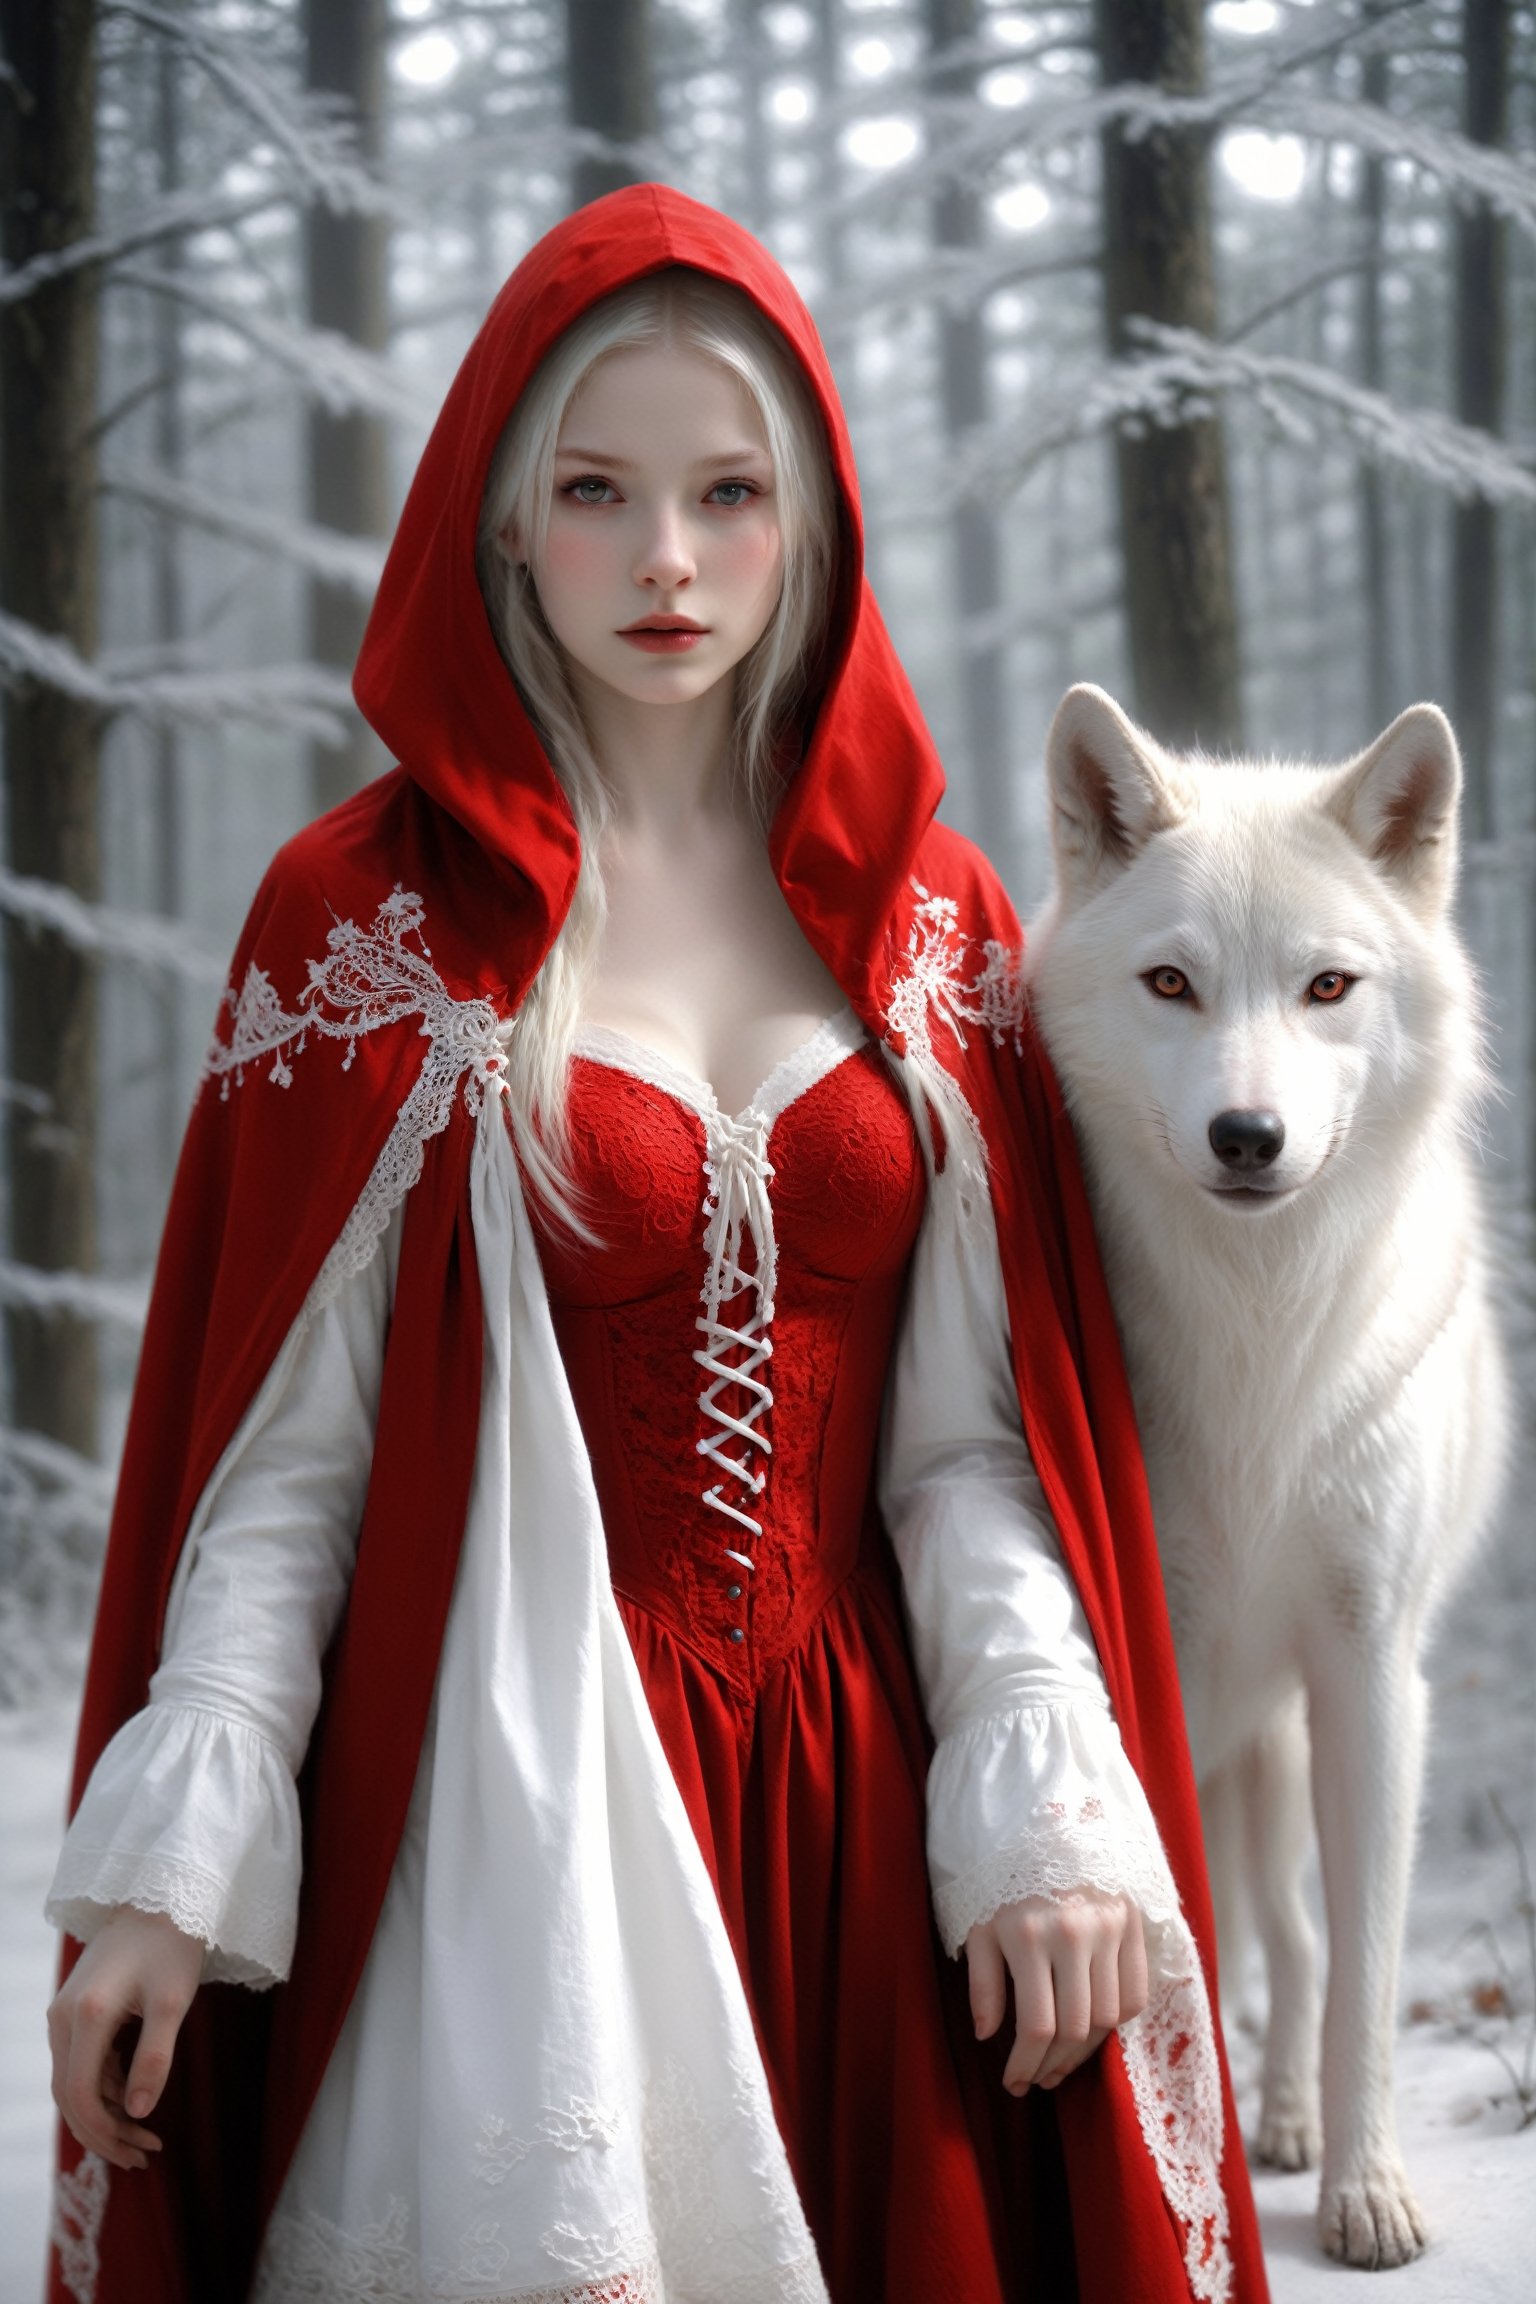 Deep in a magical forest,1 nordic girl, albino Little Red Riding Hood, wrapped in an intricate red cloak decorated with delicate lace, Red Riding Hood,
BRAKE
Pure White Wolf standing by, Gosperson, Dal, Cnd.,InkyCapWitchyHat,niji6